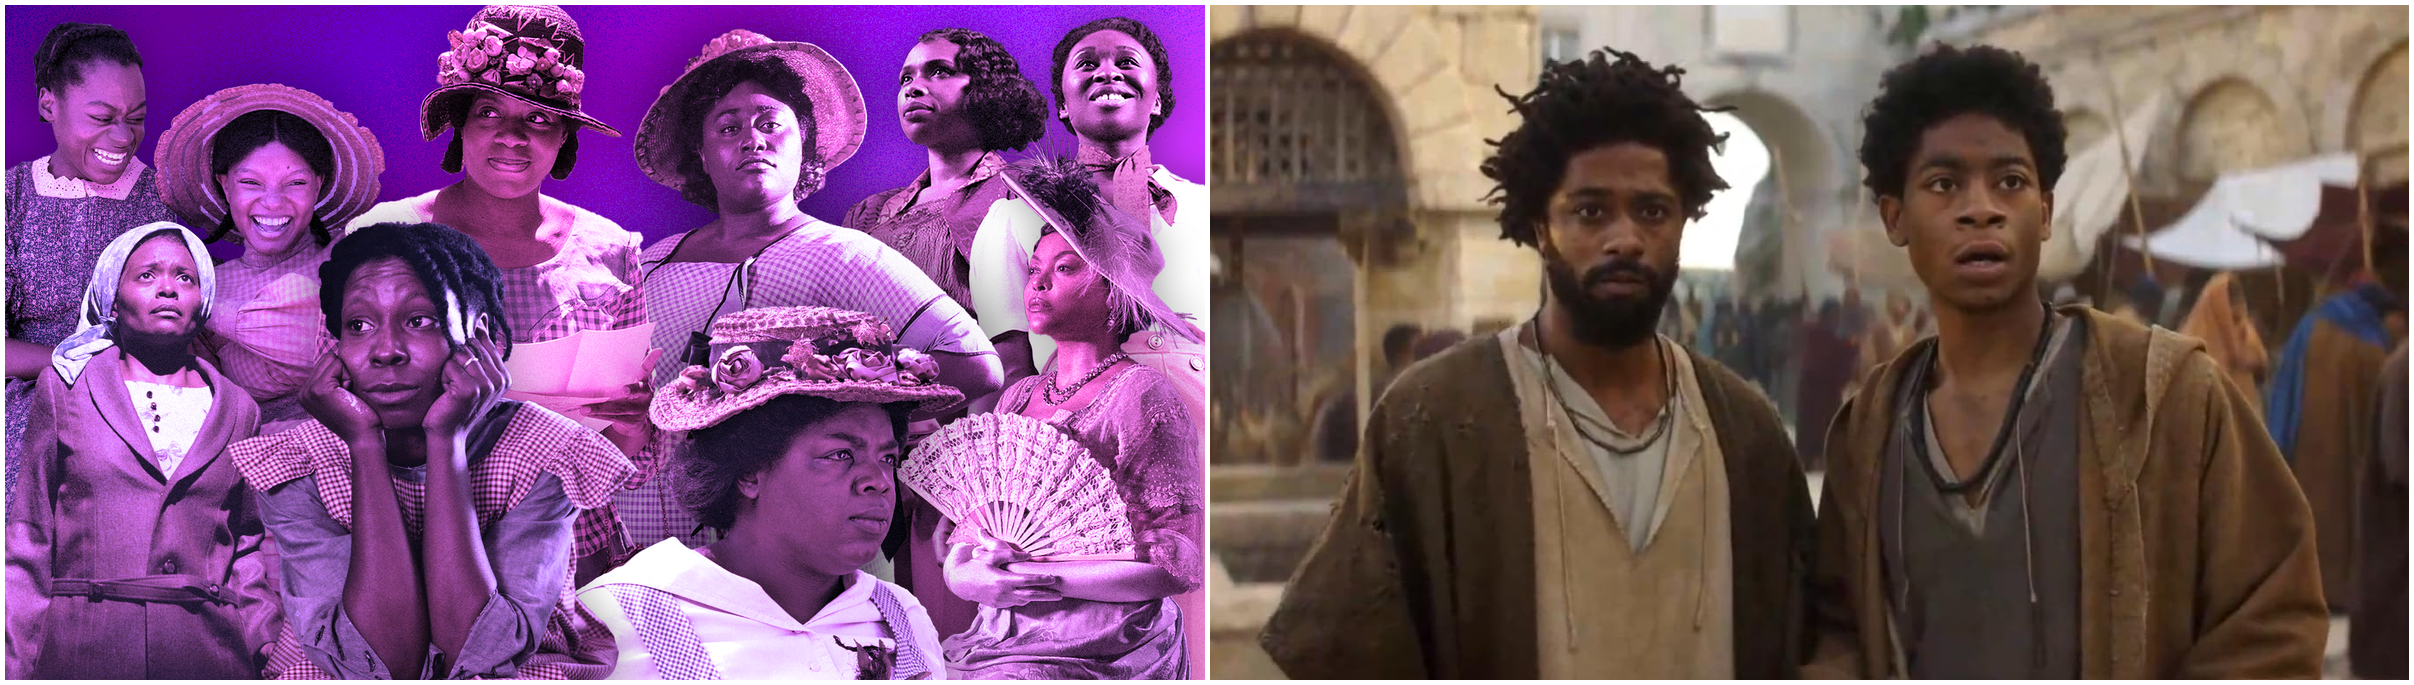 Revolutionizing Cinema: 'The Color Purple' Reimagined and 'The Book of Clarence' - Pioneering New Narratives in Film.